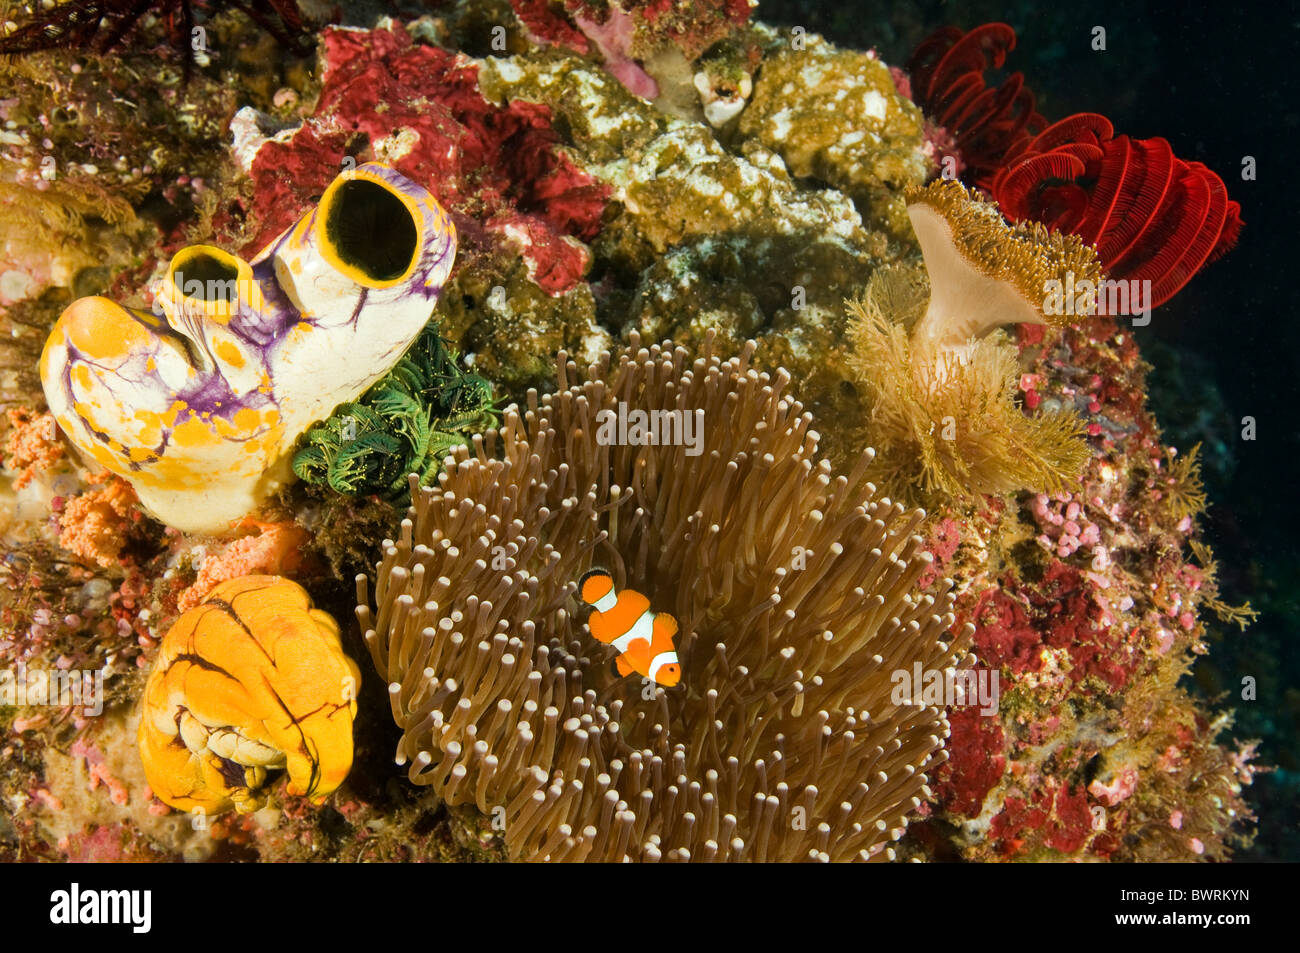 Reef scenic with clownfish, Amphiprion ocellaris, Raja Ampat Indonesia Stock Photo